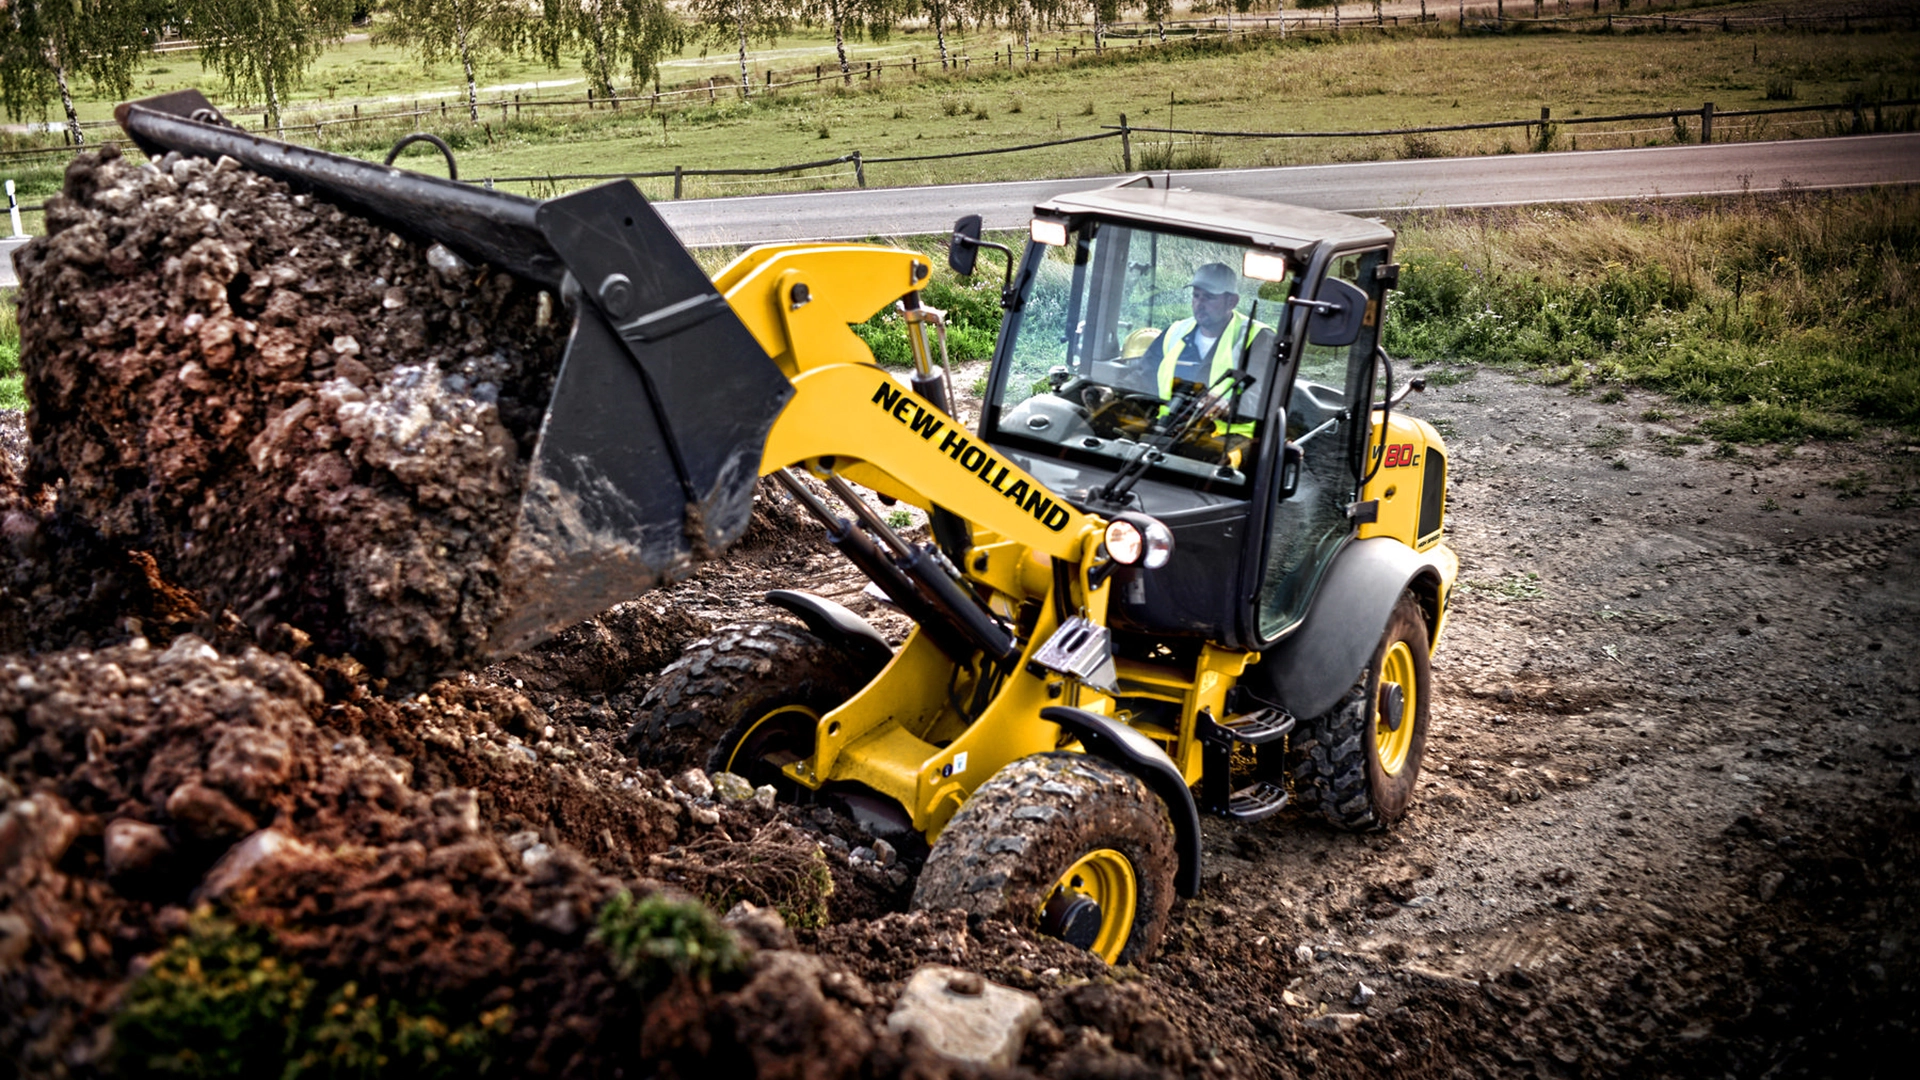 New Holland compact wheel loader in action, scooping up mixed soil on a construction site.